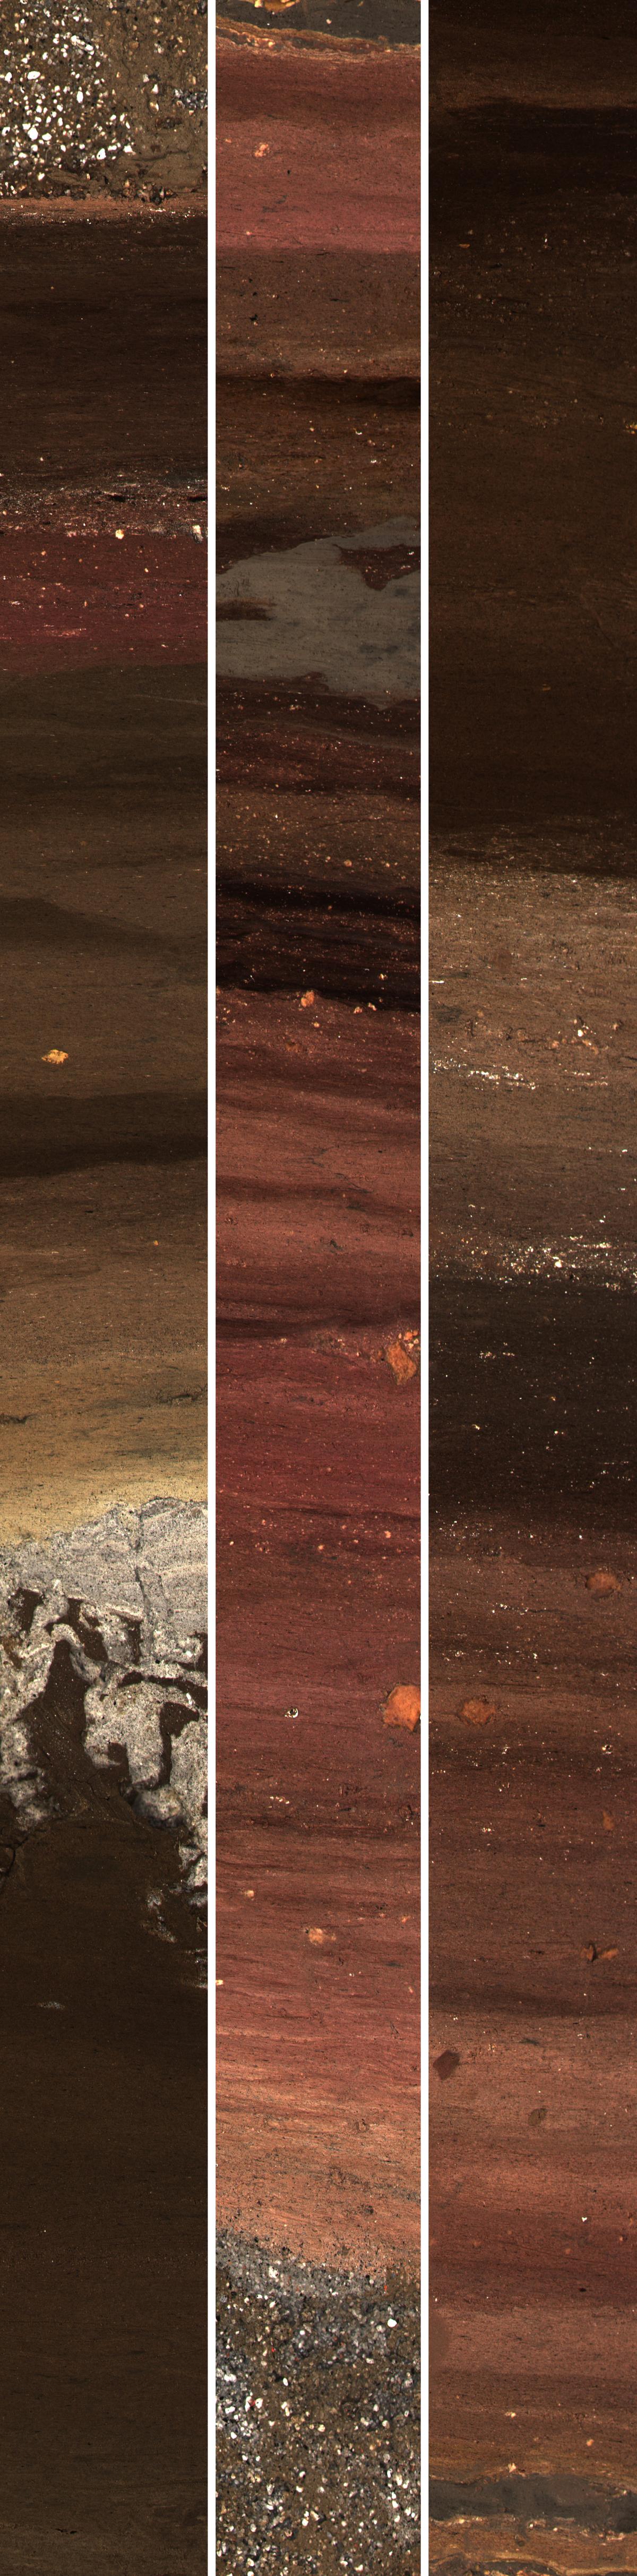 Image of layered sediment cores collected in Mexico